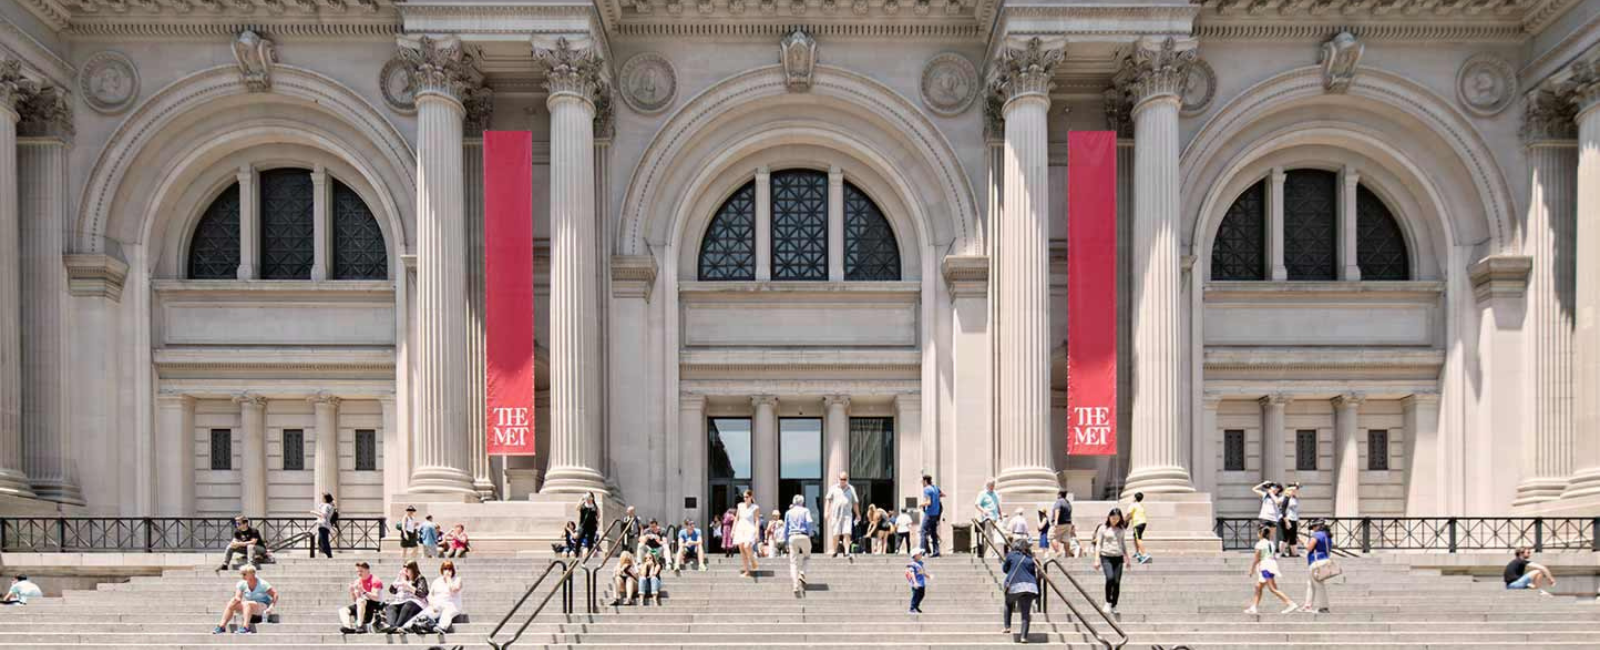 The Met stairs and entrance